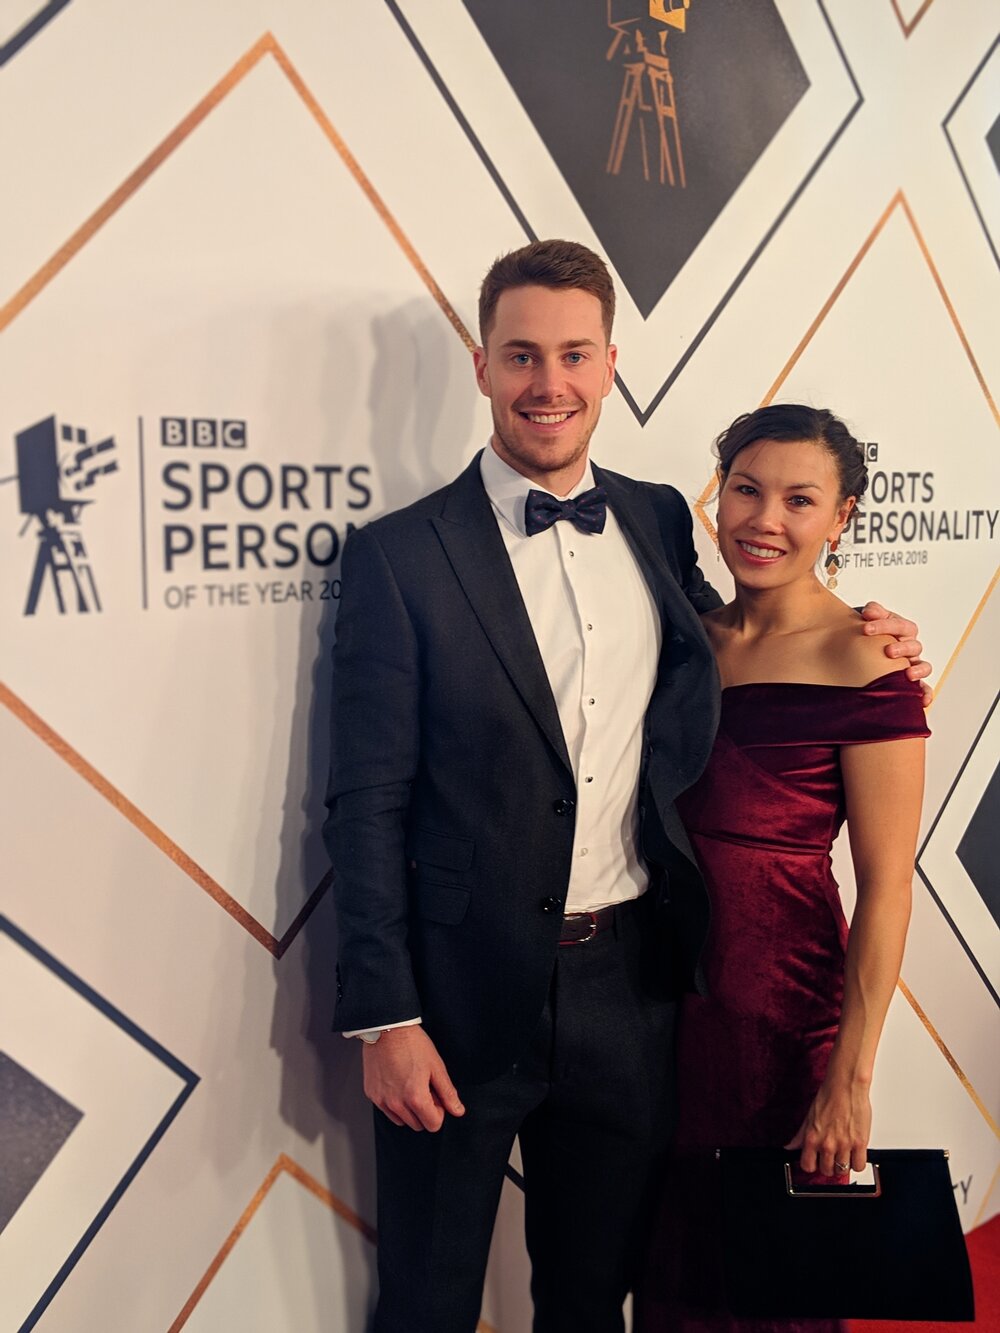 Katee Hui and her husband Calum at the BBC Sports Personality of the Year awards. Photo: Katee Hui